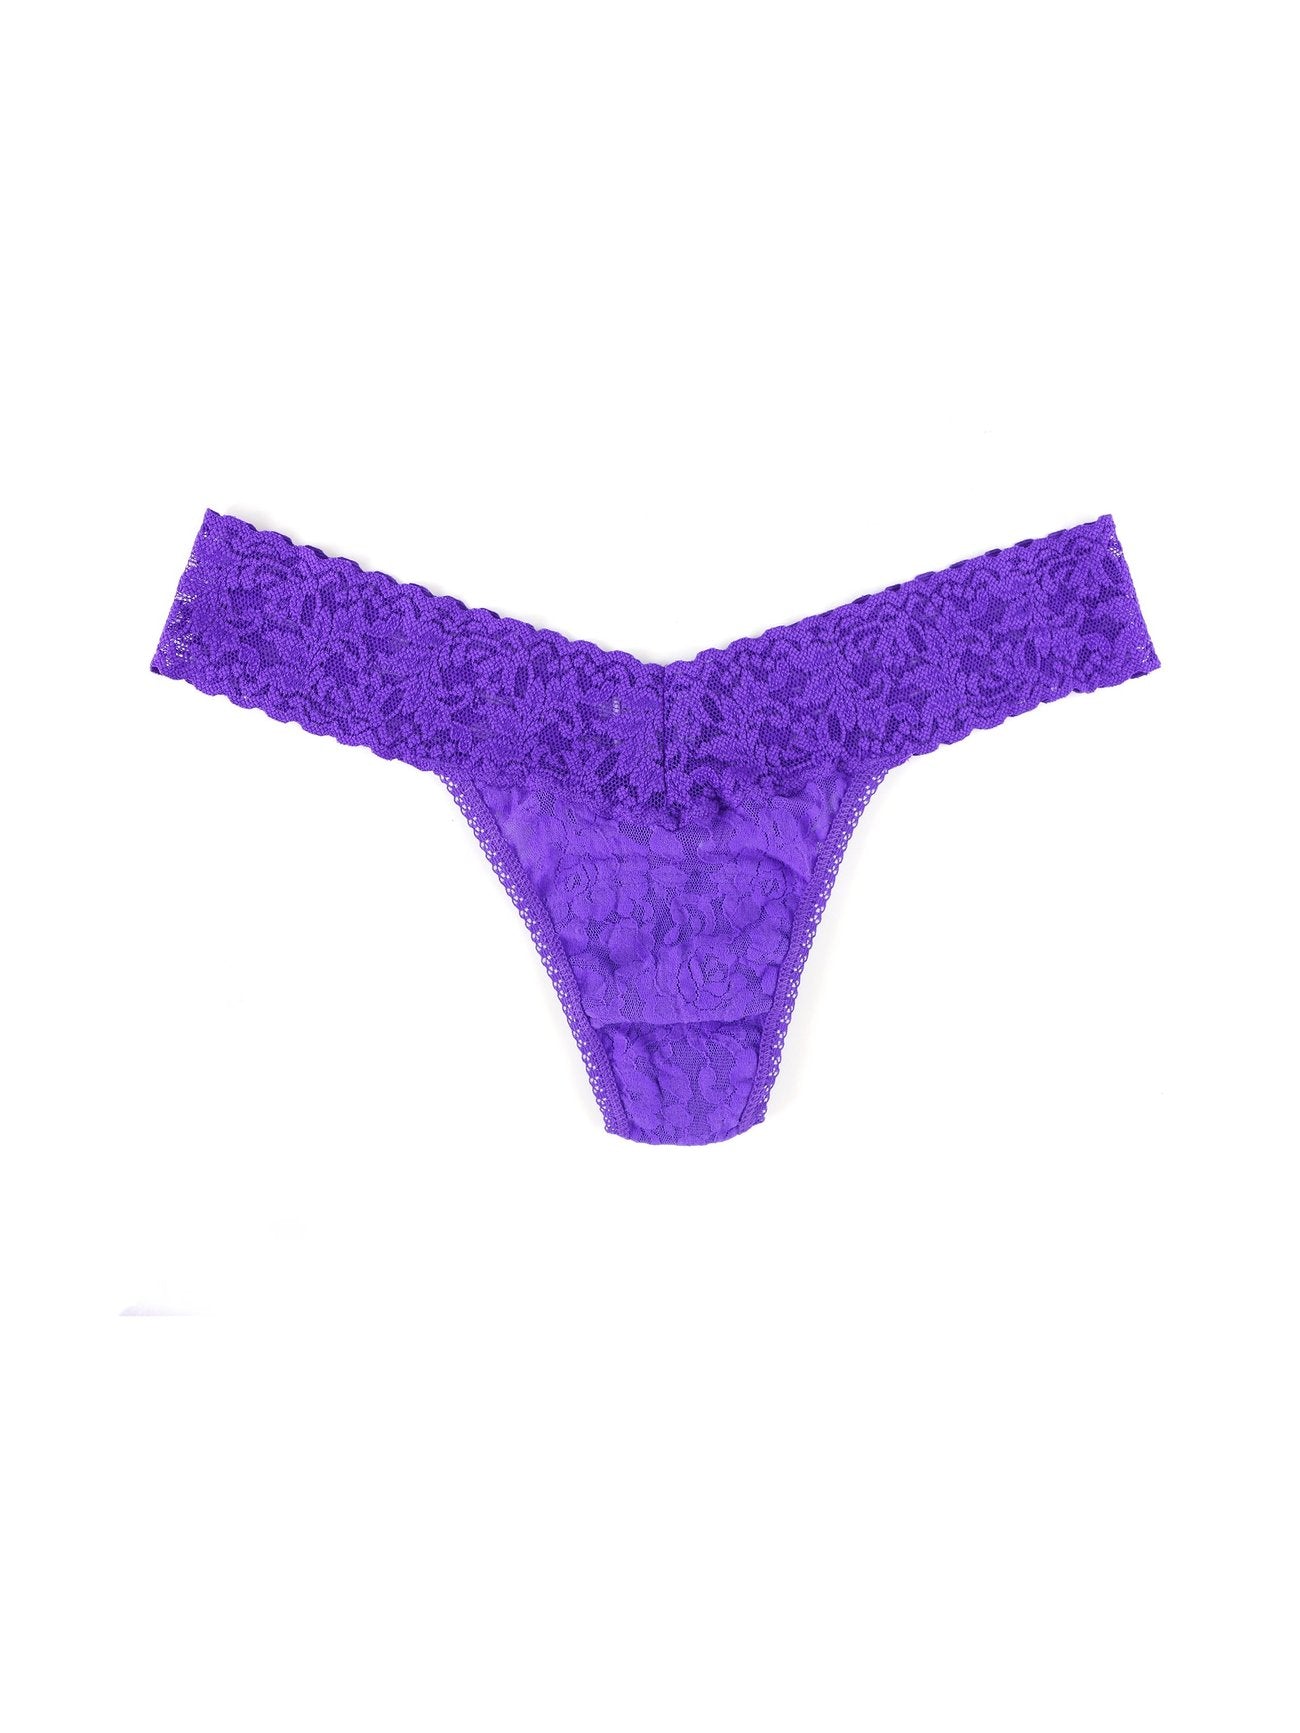 Buy vivacious-violet Hanky Panky Signature Lace Low Rise Thong - Packaged 4911p